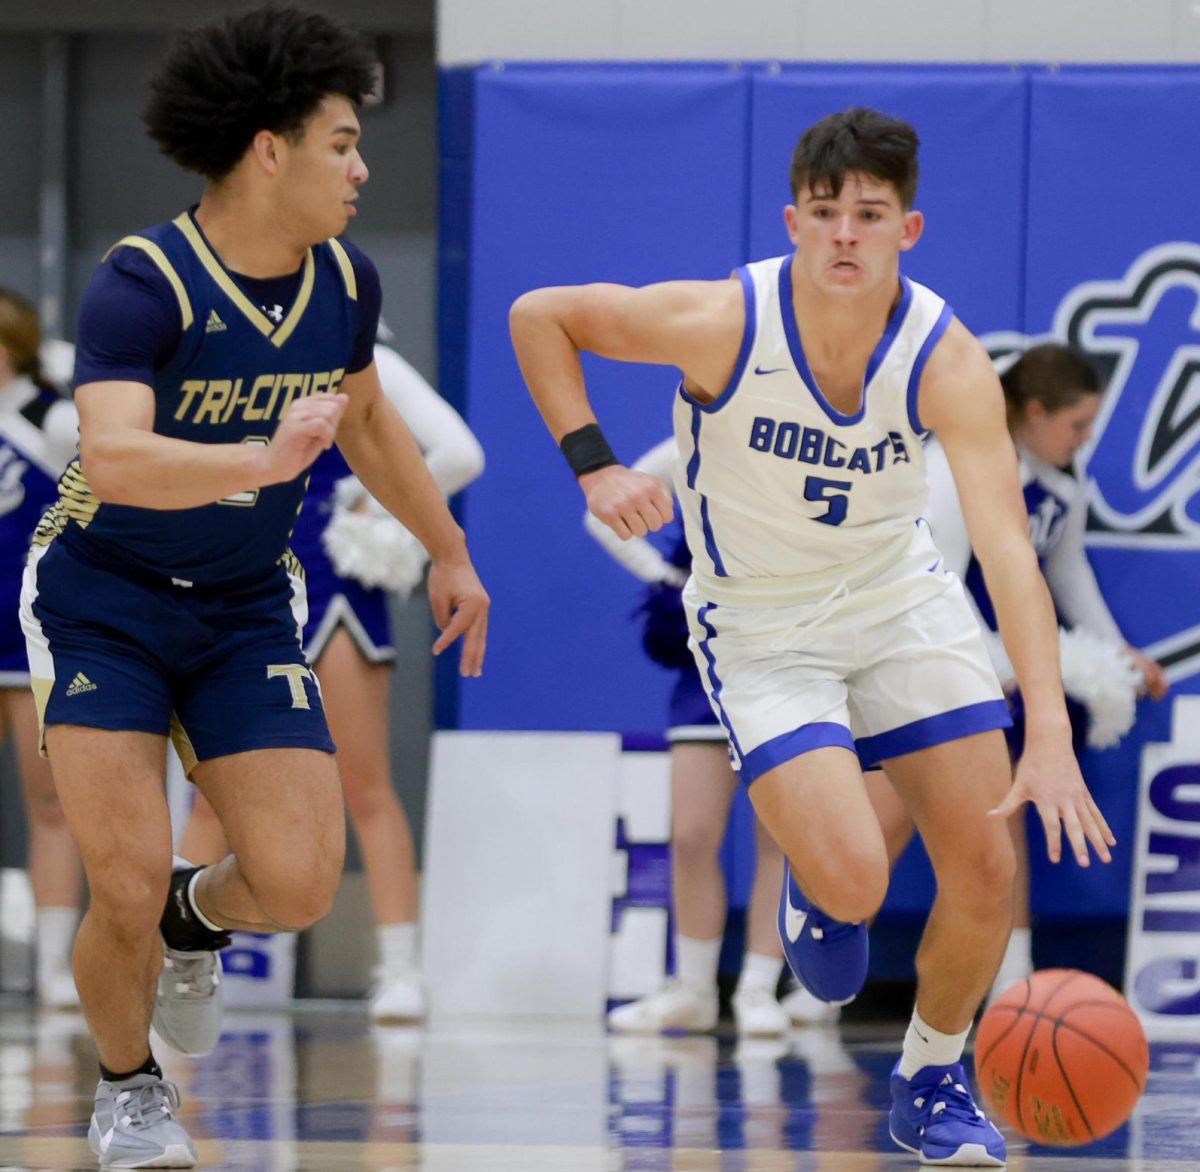 Blake Burnett and the Bell County Bobcats improved to 7-0 on the season with a pair of wins over the weekend at the Big Lou Classic at Perry Central.